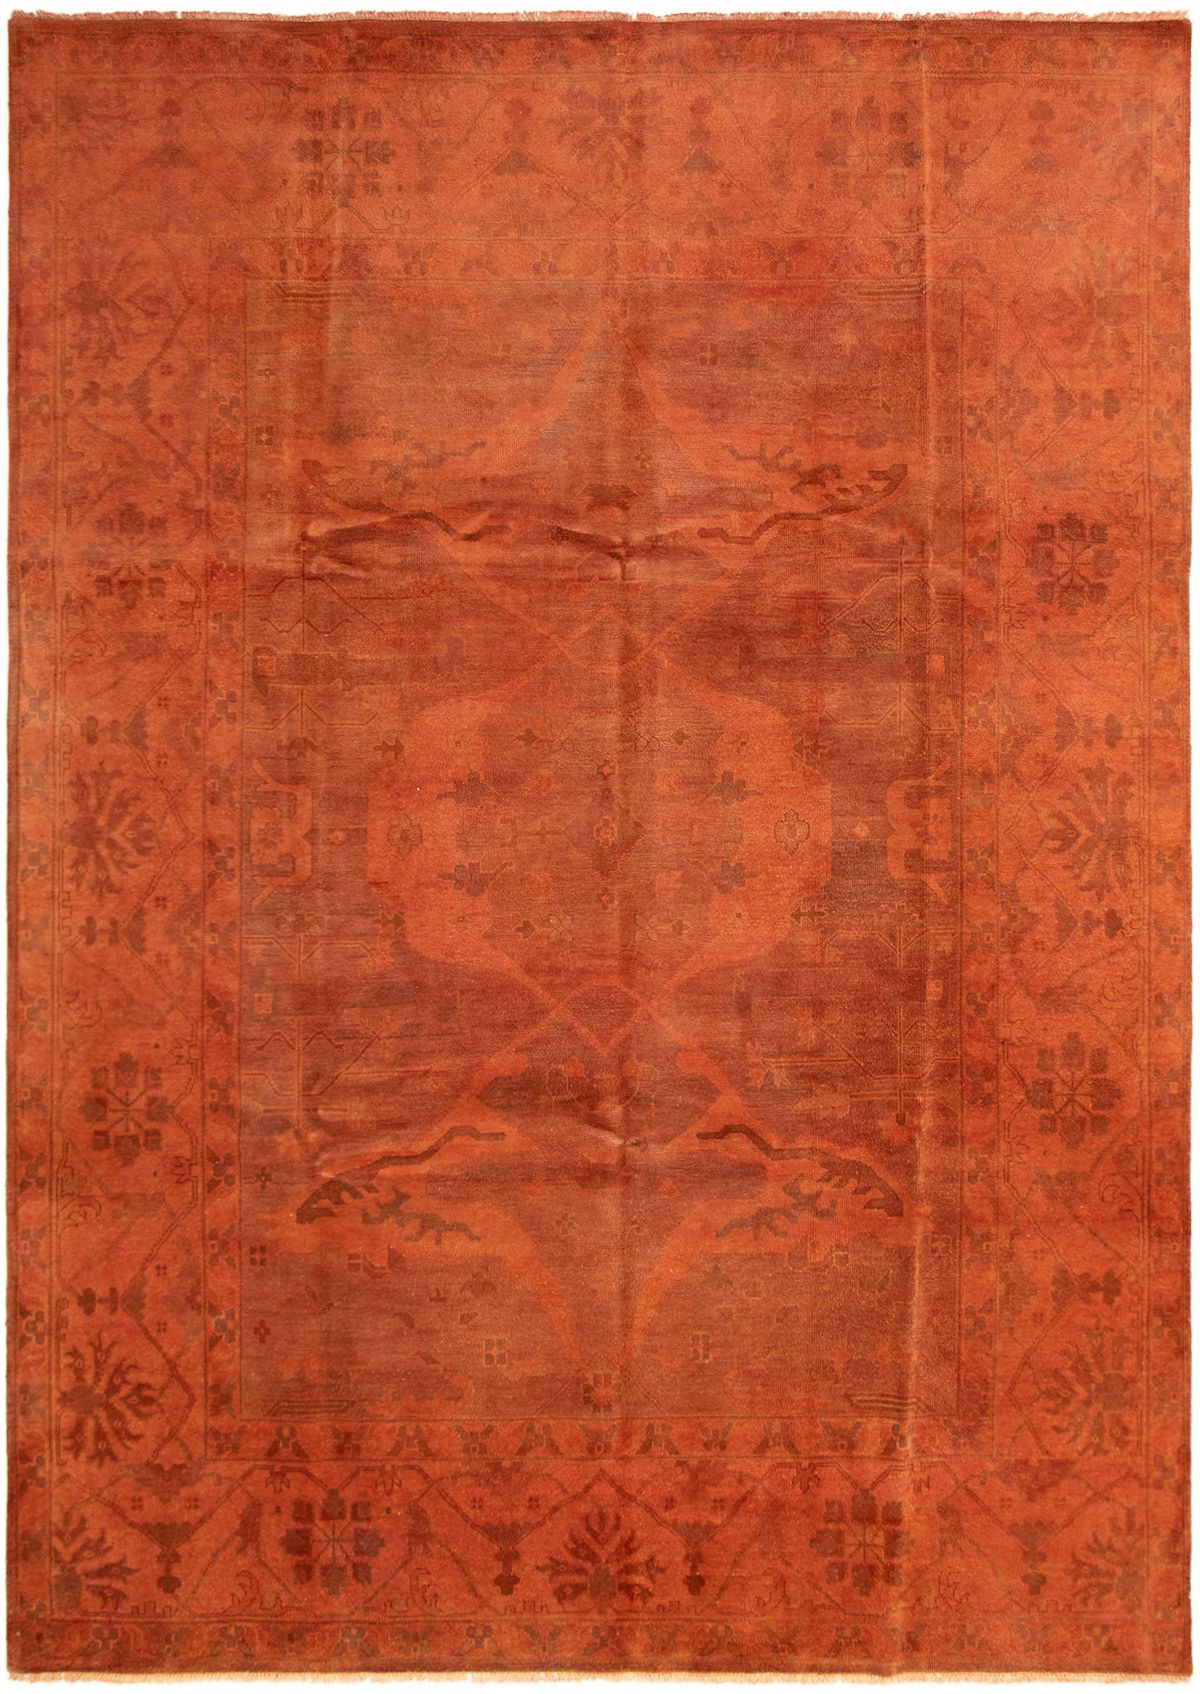 Hand-knotted Color transition Copper Wool Rug 9'10" x 13'10" Size: 9'10" x 13'10"  